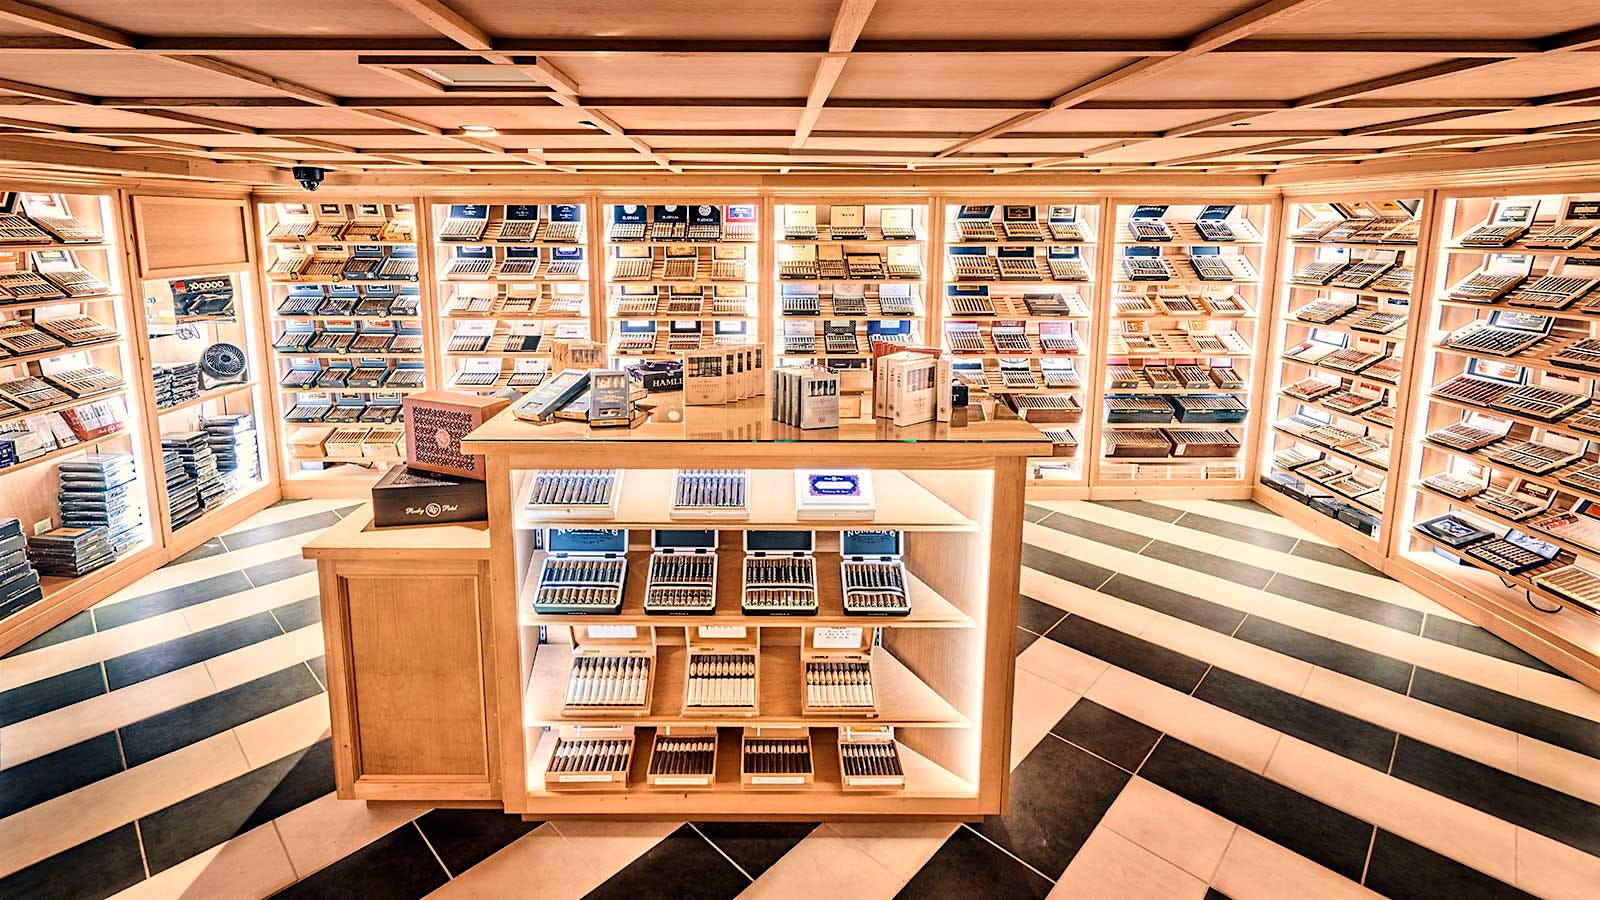 The walk-in humidor is stocked with the full collection of Rocky Patel cigars. Other big name brands in the humidor include Arturo Fuente, Ashton, Padrón and My Father.